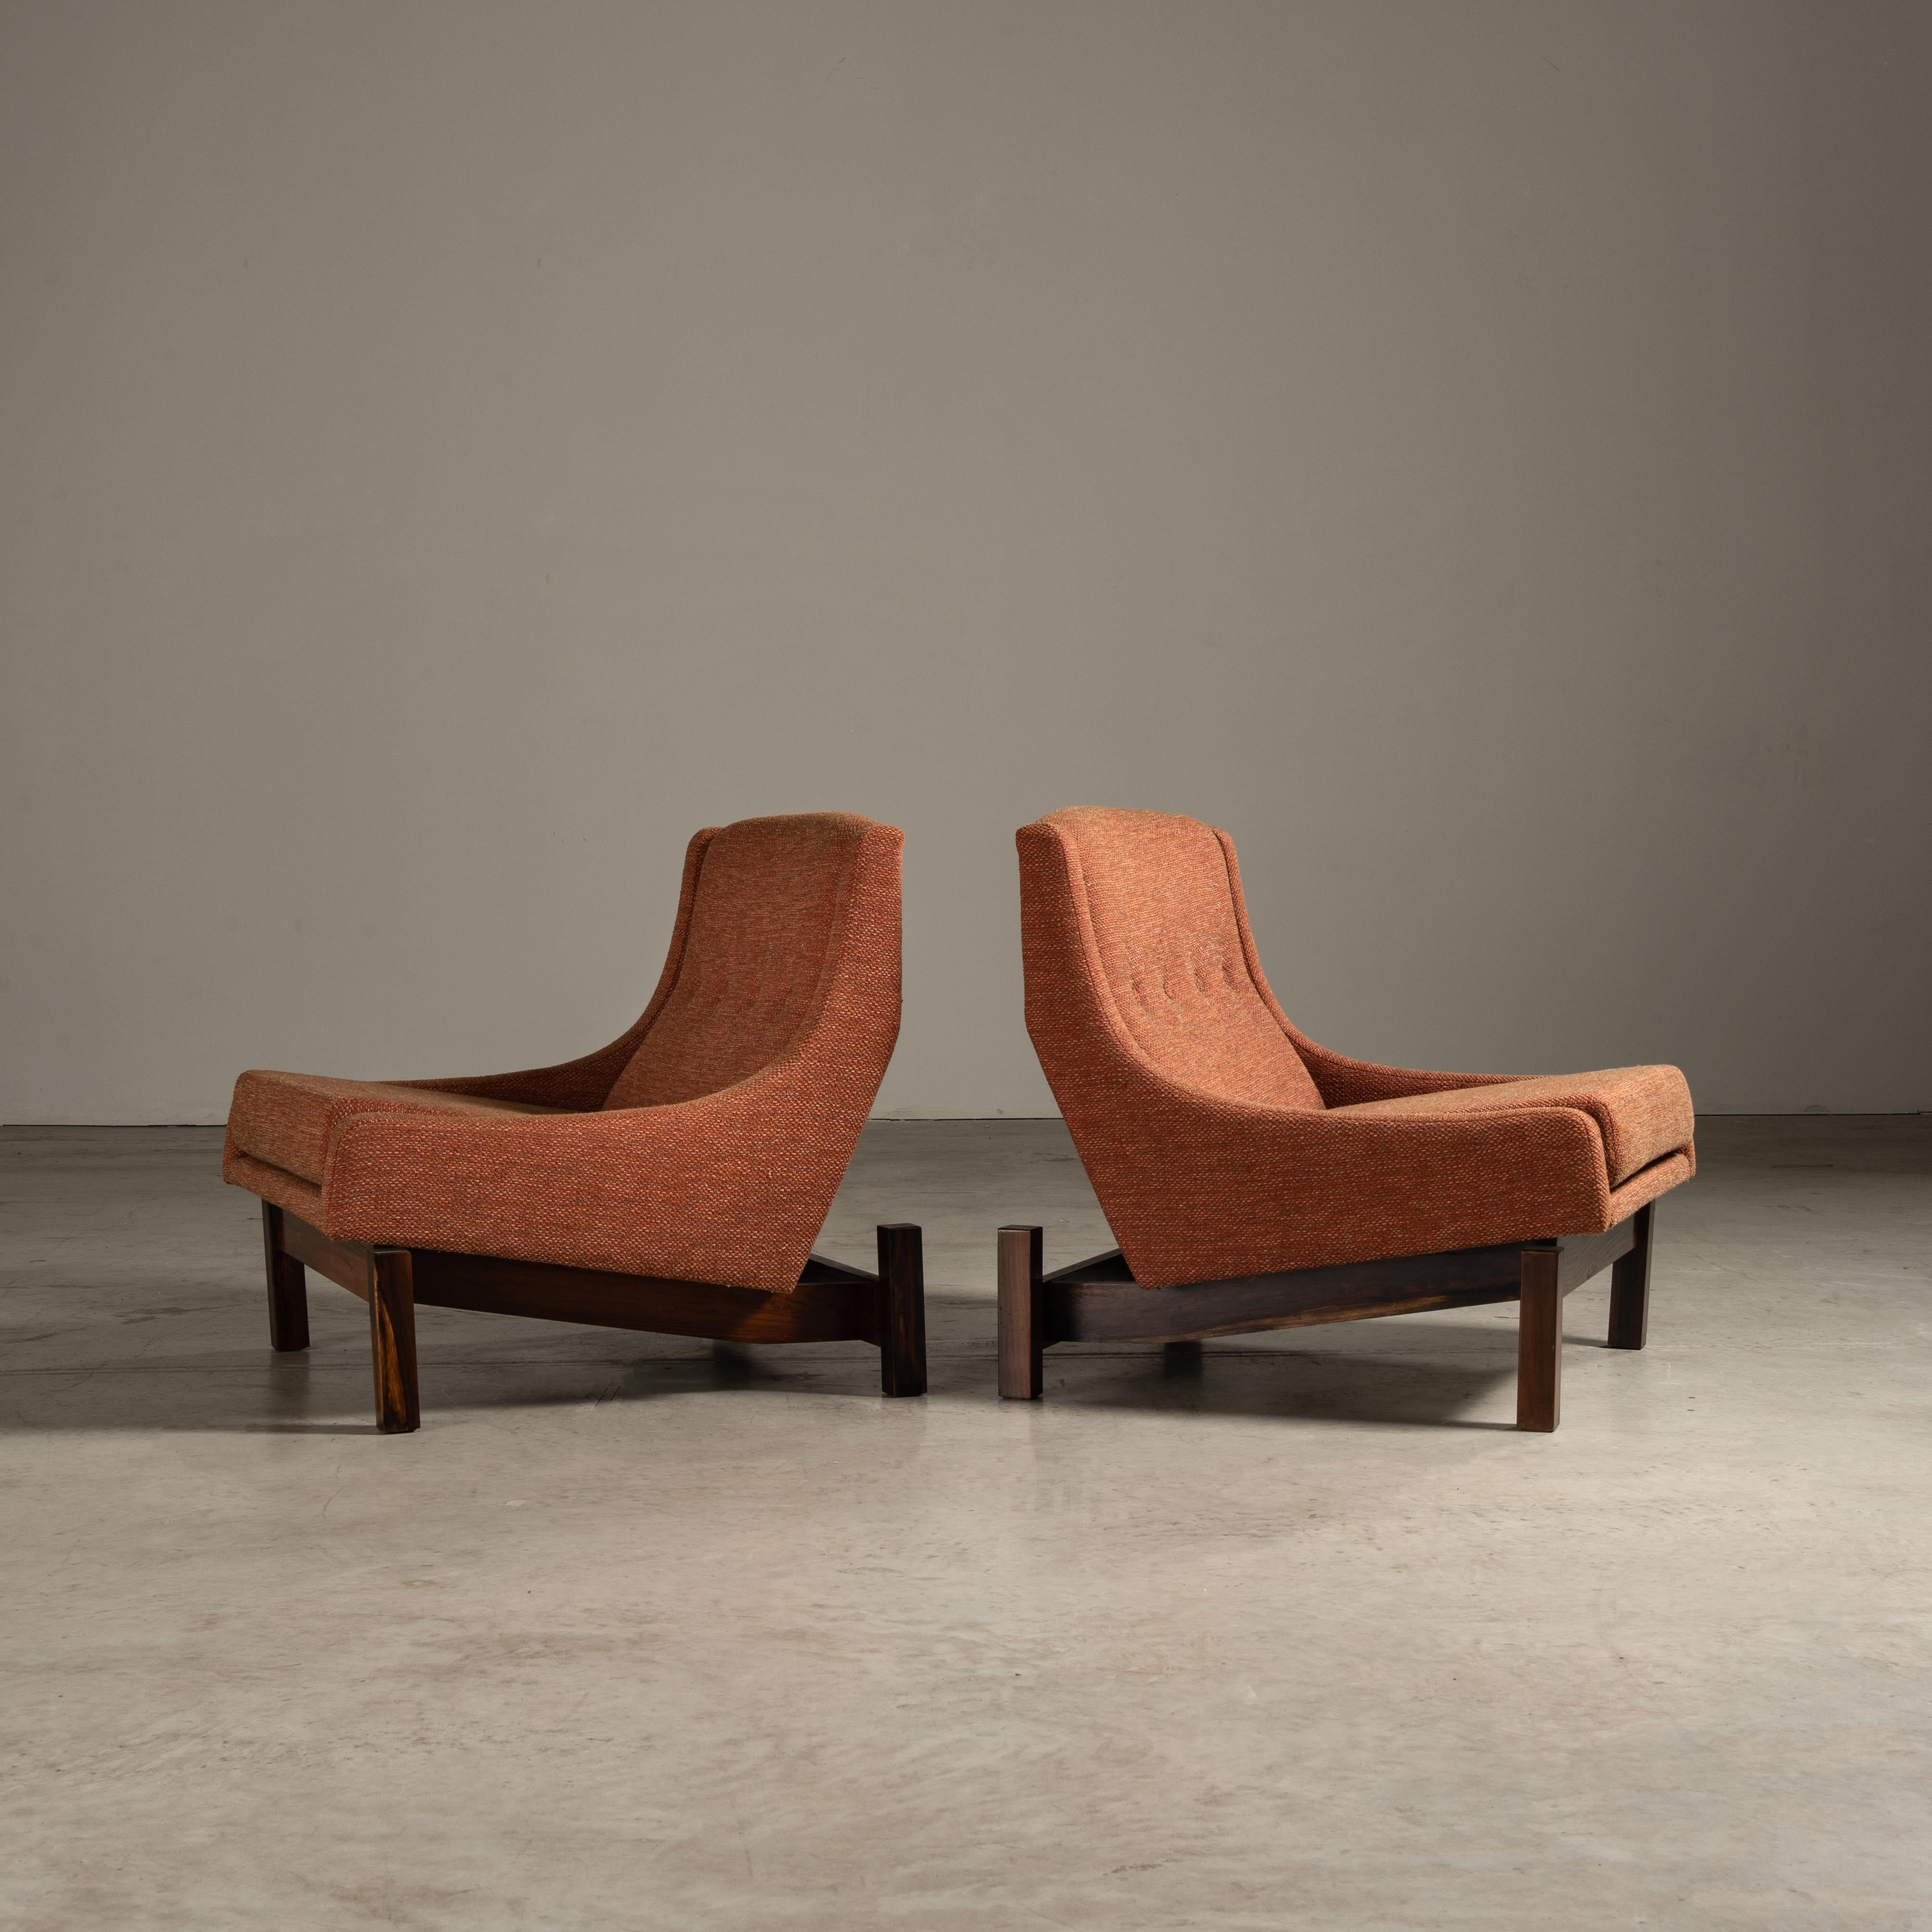 The Paraty lounge chairs reflect the design principles of the Brazilian architect and designer Sergio Rodrigues, known for his significant contribution to modern Brazilian furniture design in the 20th century. Rodrigues's pieces are often recognized